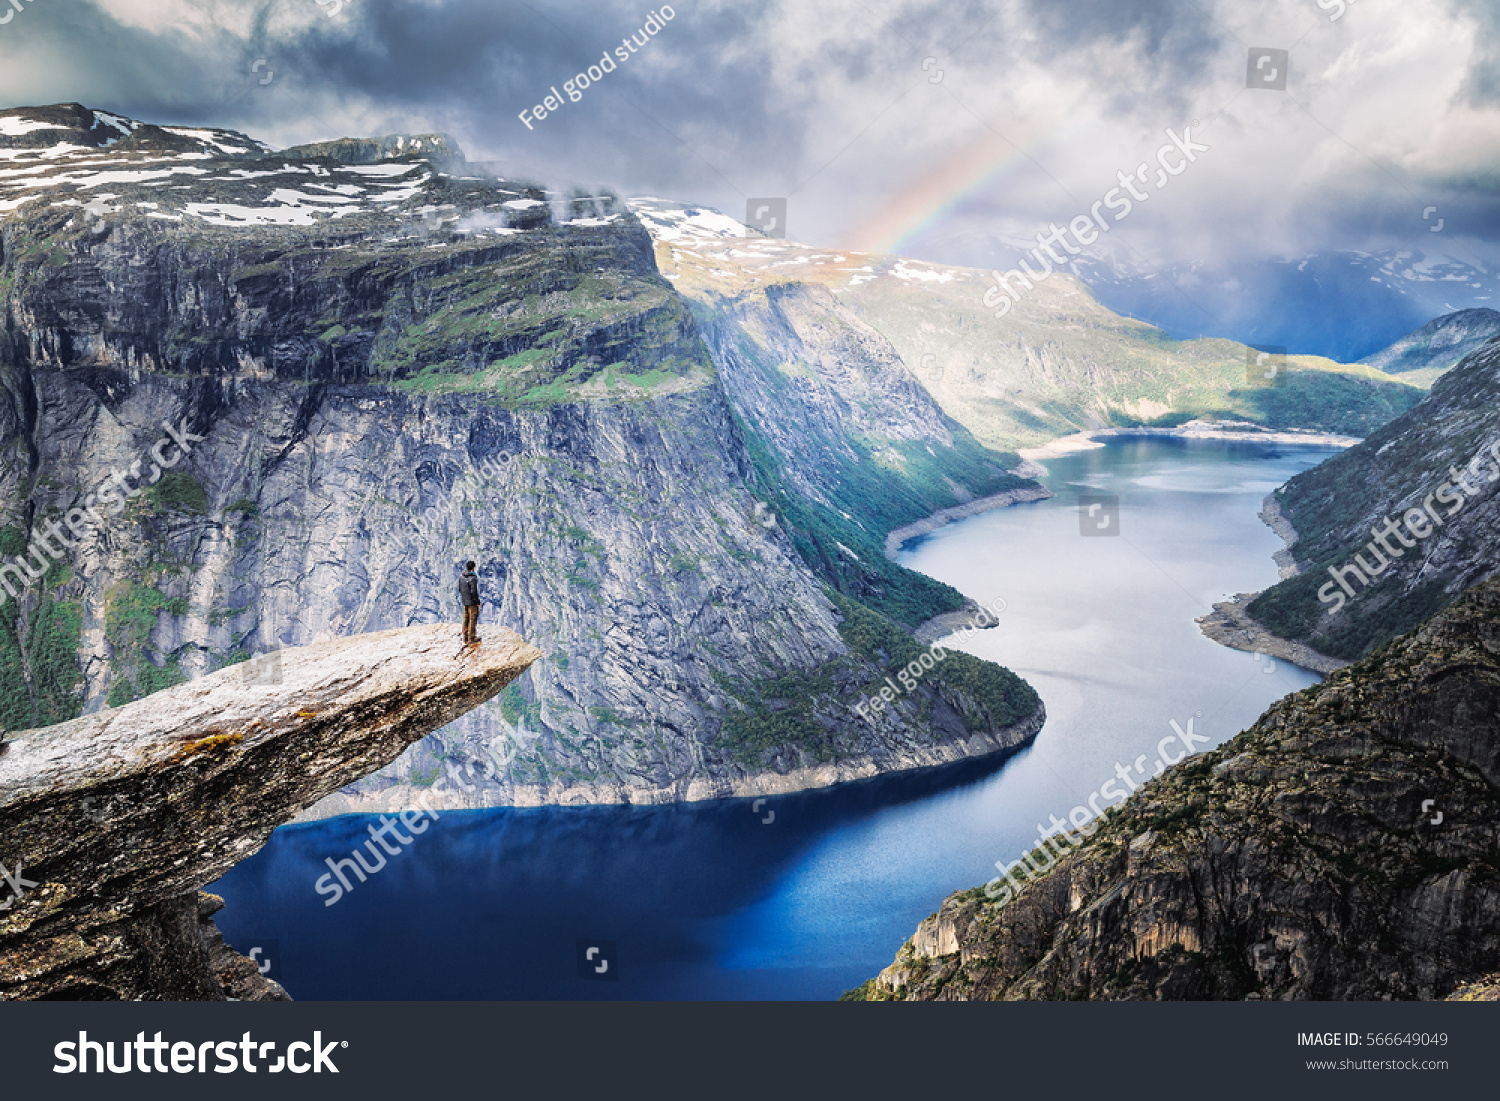 Trolltunga (Troll Tongue), climber standing at edge of cliff Trolltunga looking at rainbow against mountains, over amazing blue lake. Beautiful landscape of wild nature in Norway, Scandinavia. #566649049